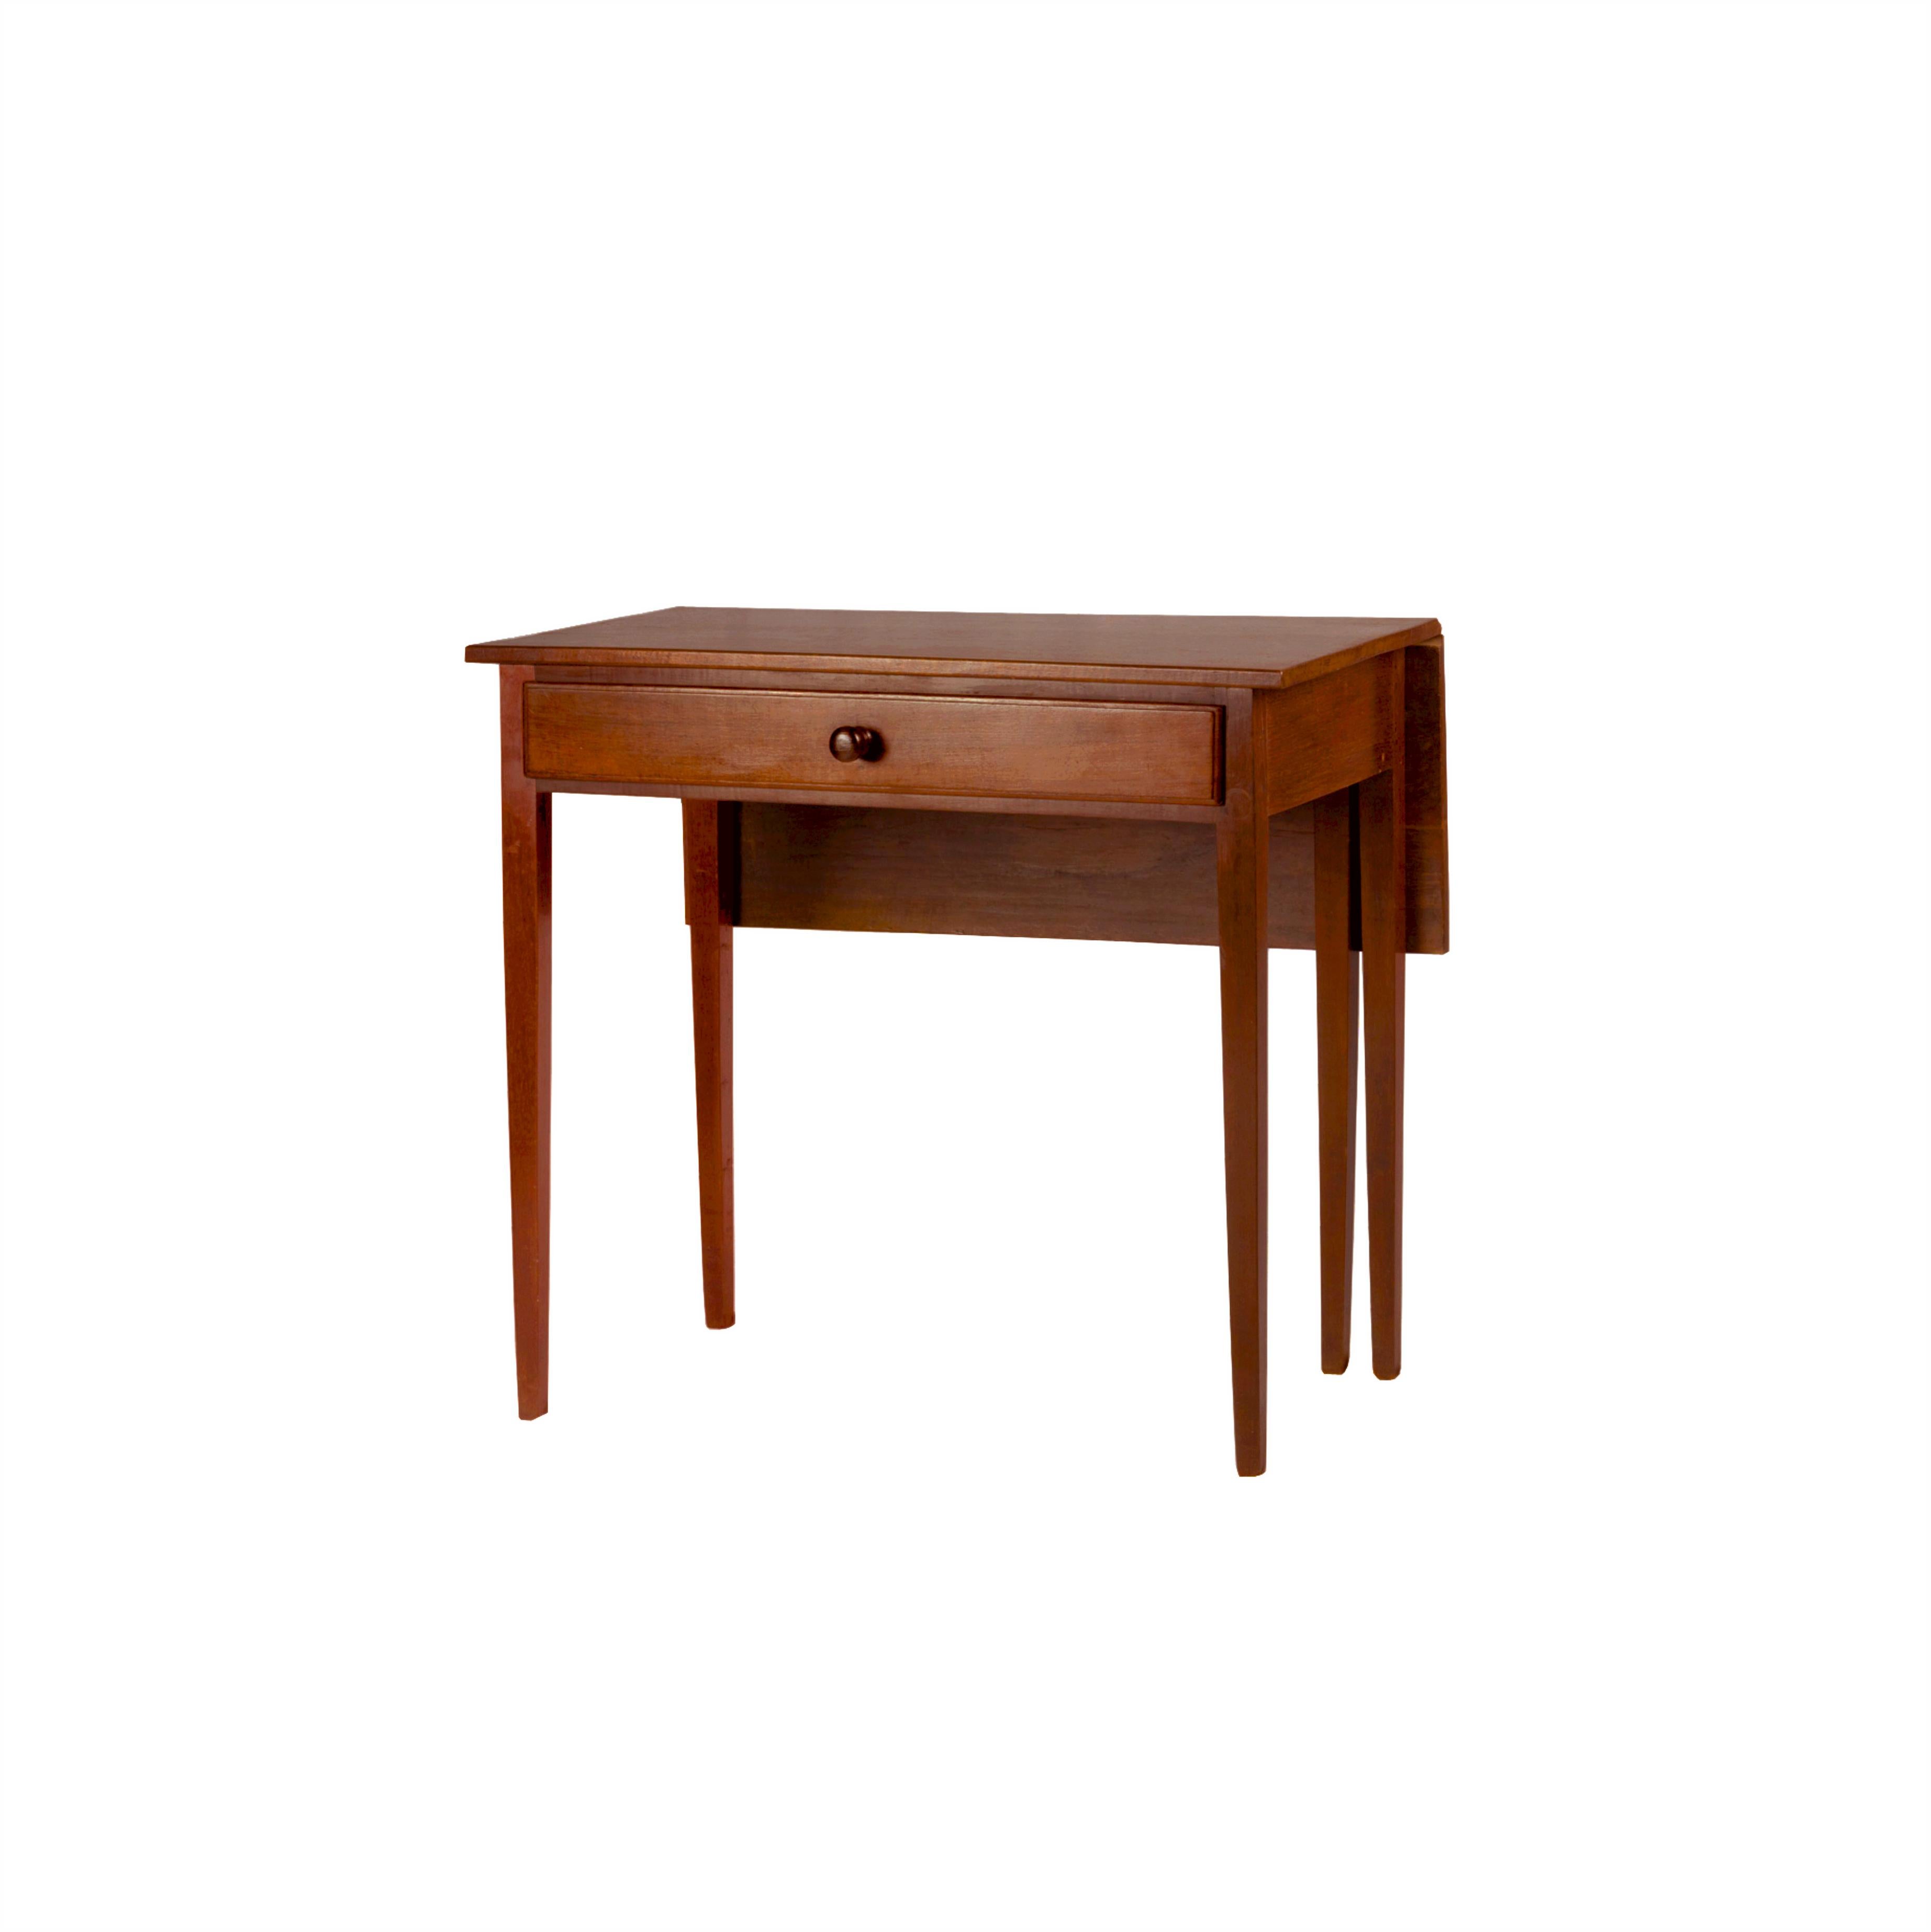 A beautiful Portuguese drop leaf side table with 5 legs in mahogany from Madeira. Flap, box and straight leg, drawer and folding top in Queen Maria the First Portuguese style, highly inspired by the British lines with a bit of exuberance from the